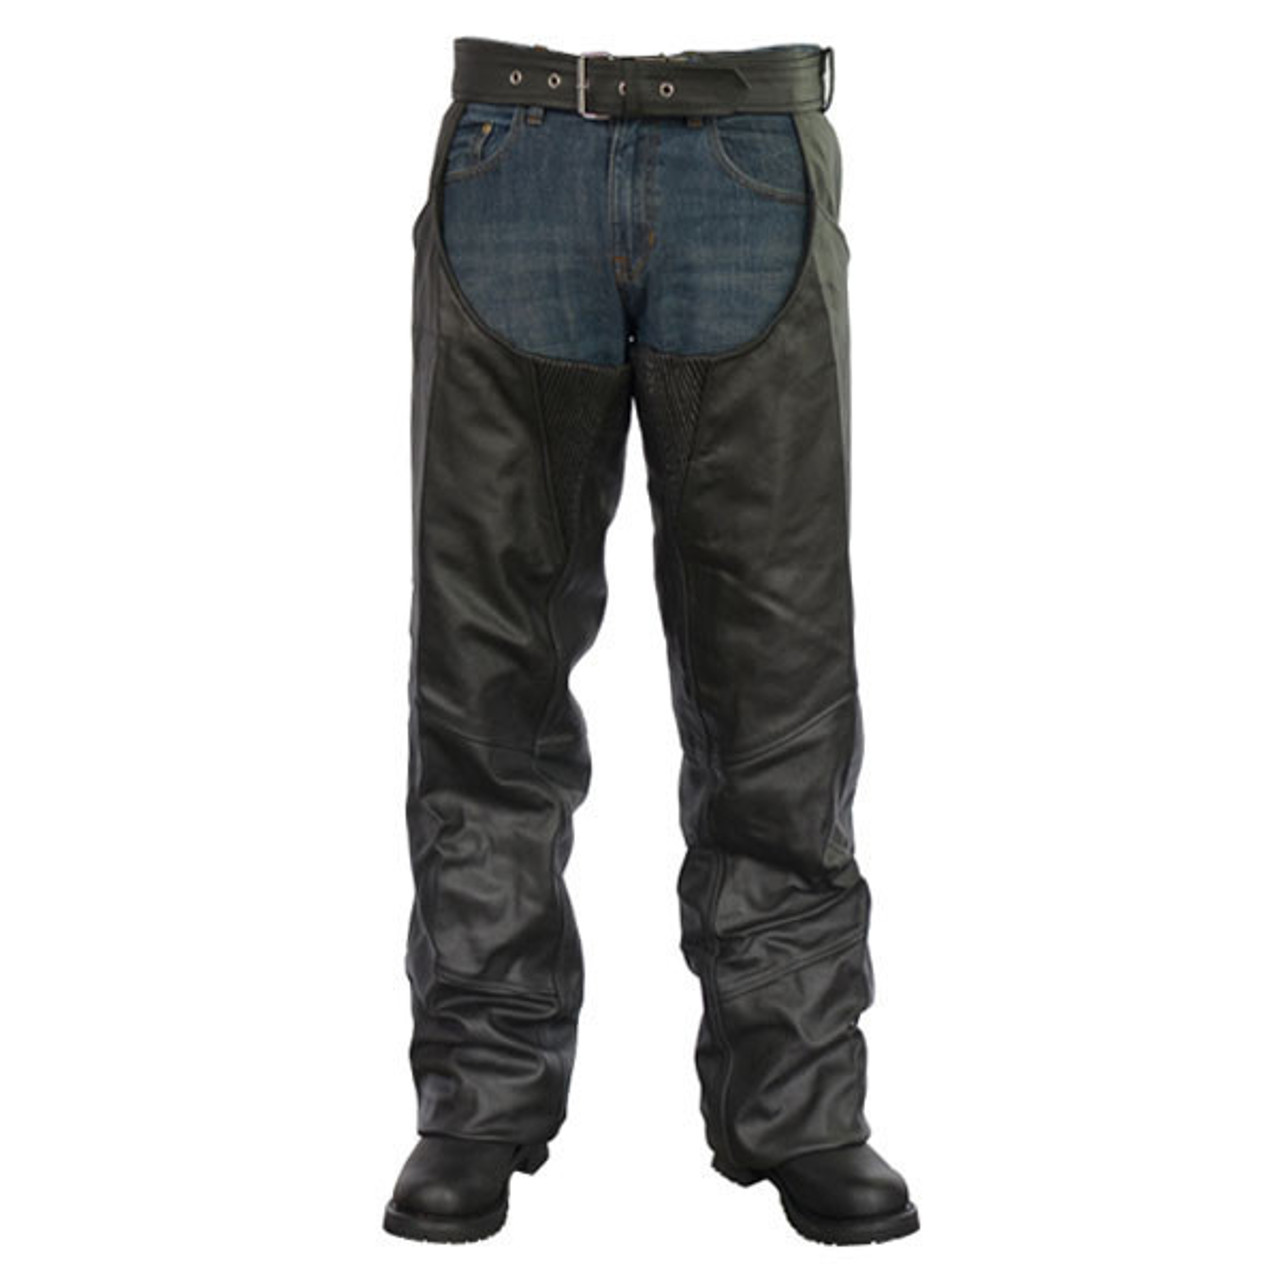 Tall Biker Leather Chaps - Team Motorcycle